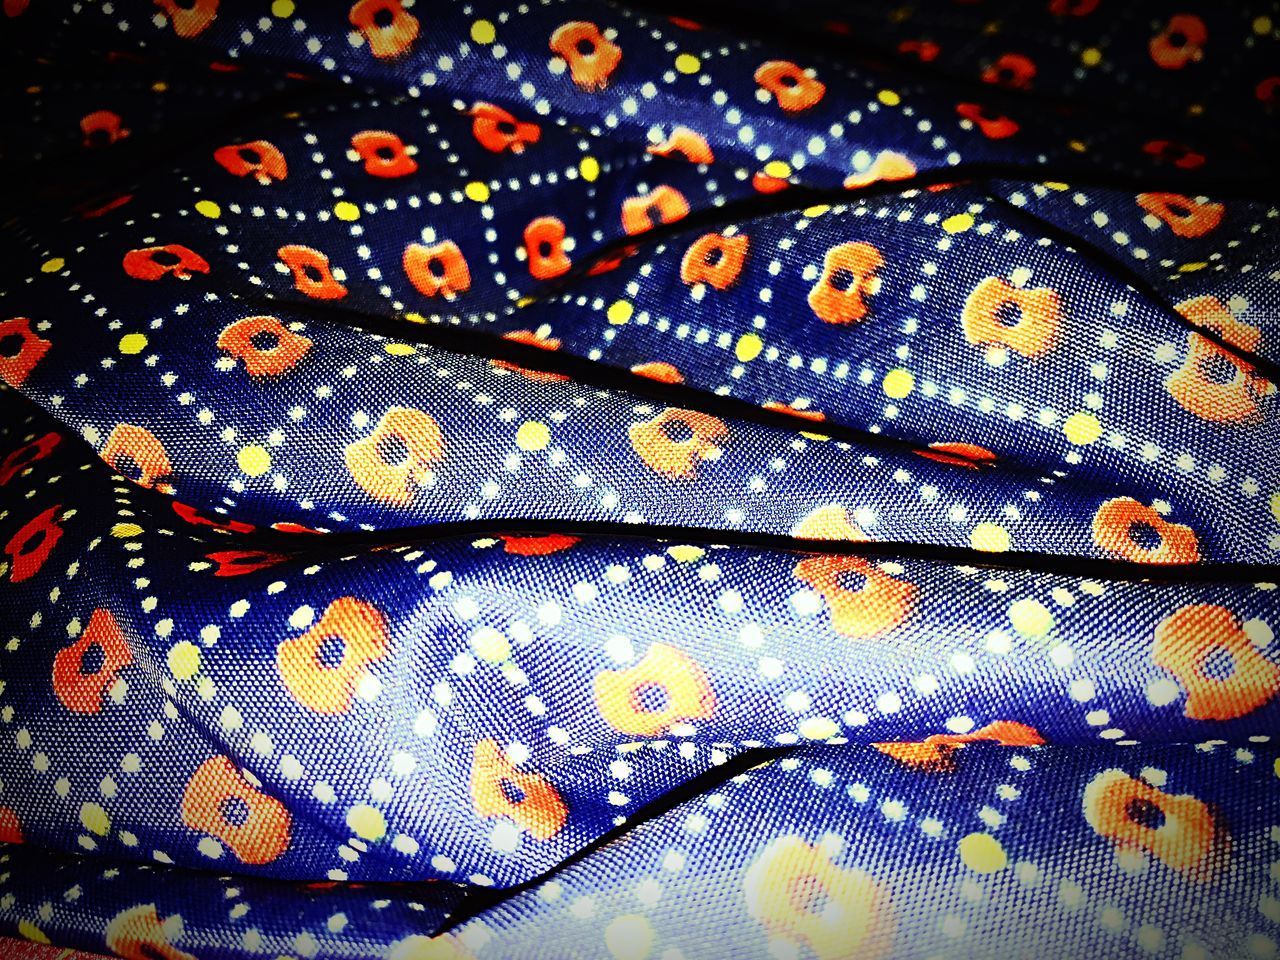 CLOSE-UP OF MULTI COLORED PATTERN